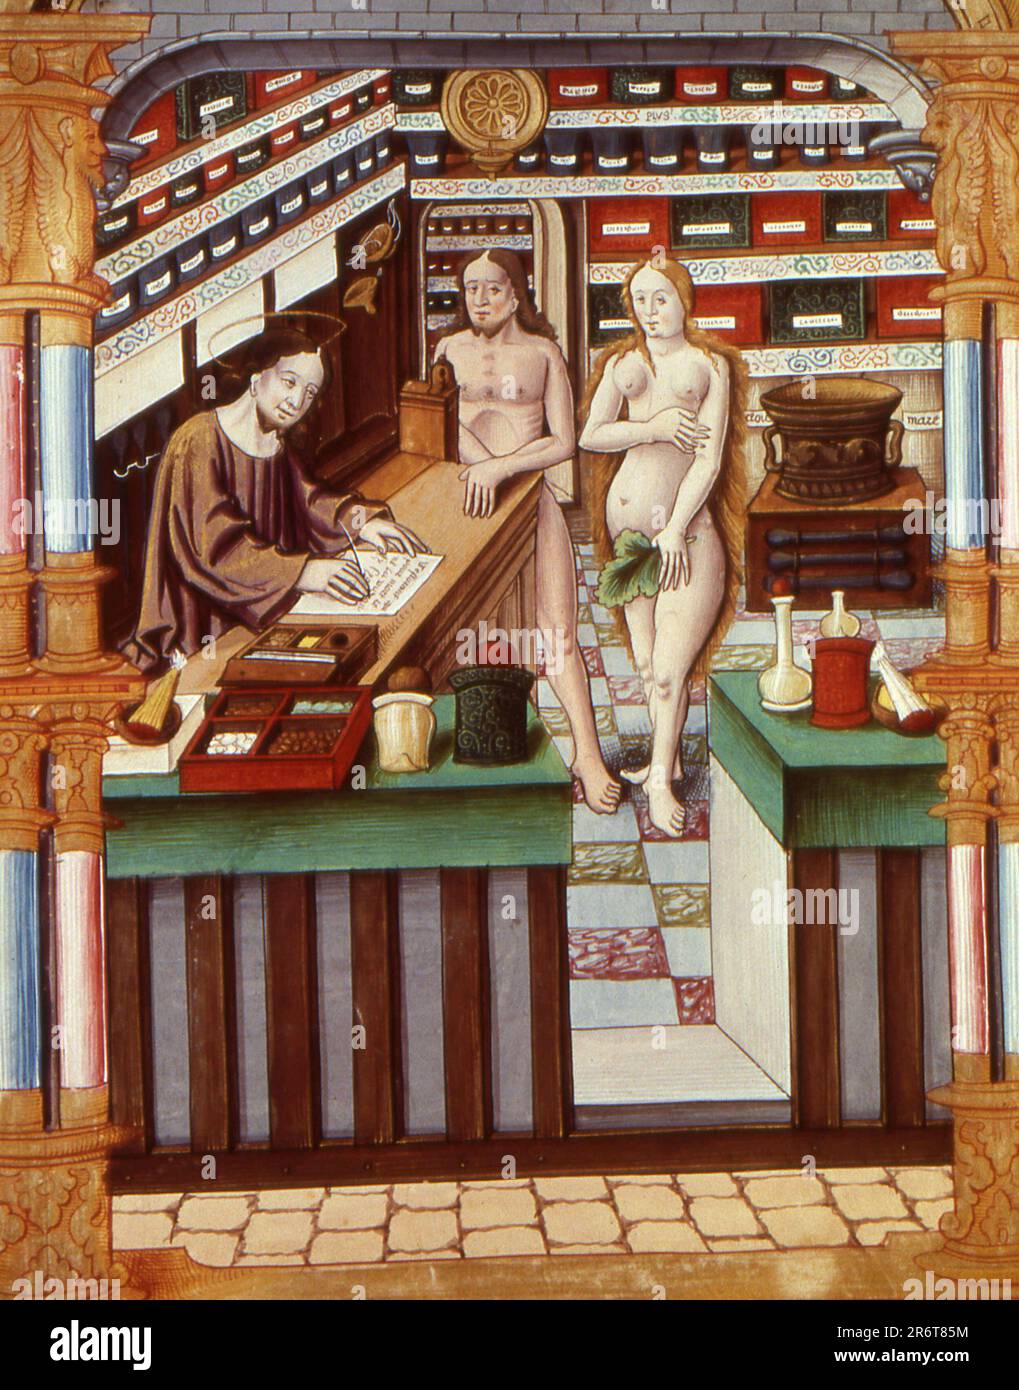 Christ writing a recipe. Museum: BIBLIOTHEQUE NATIONALE DE FRANCE. Author: ANONYMOUS. Stock Photo